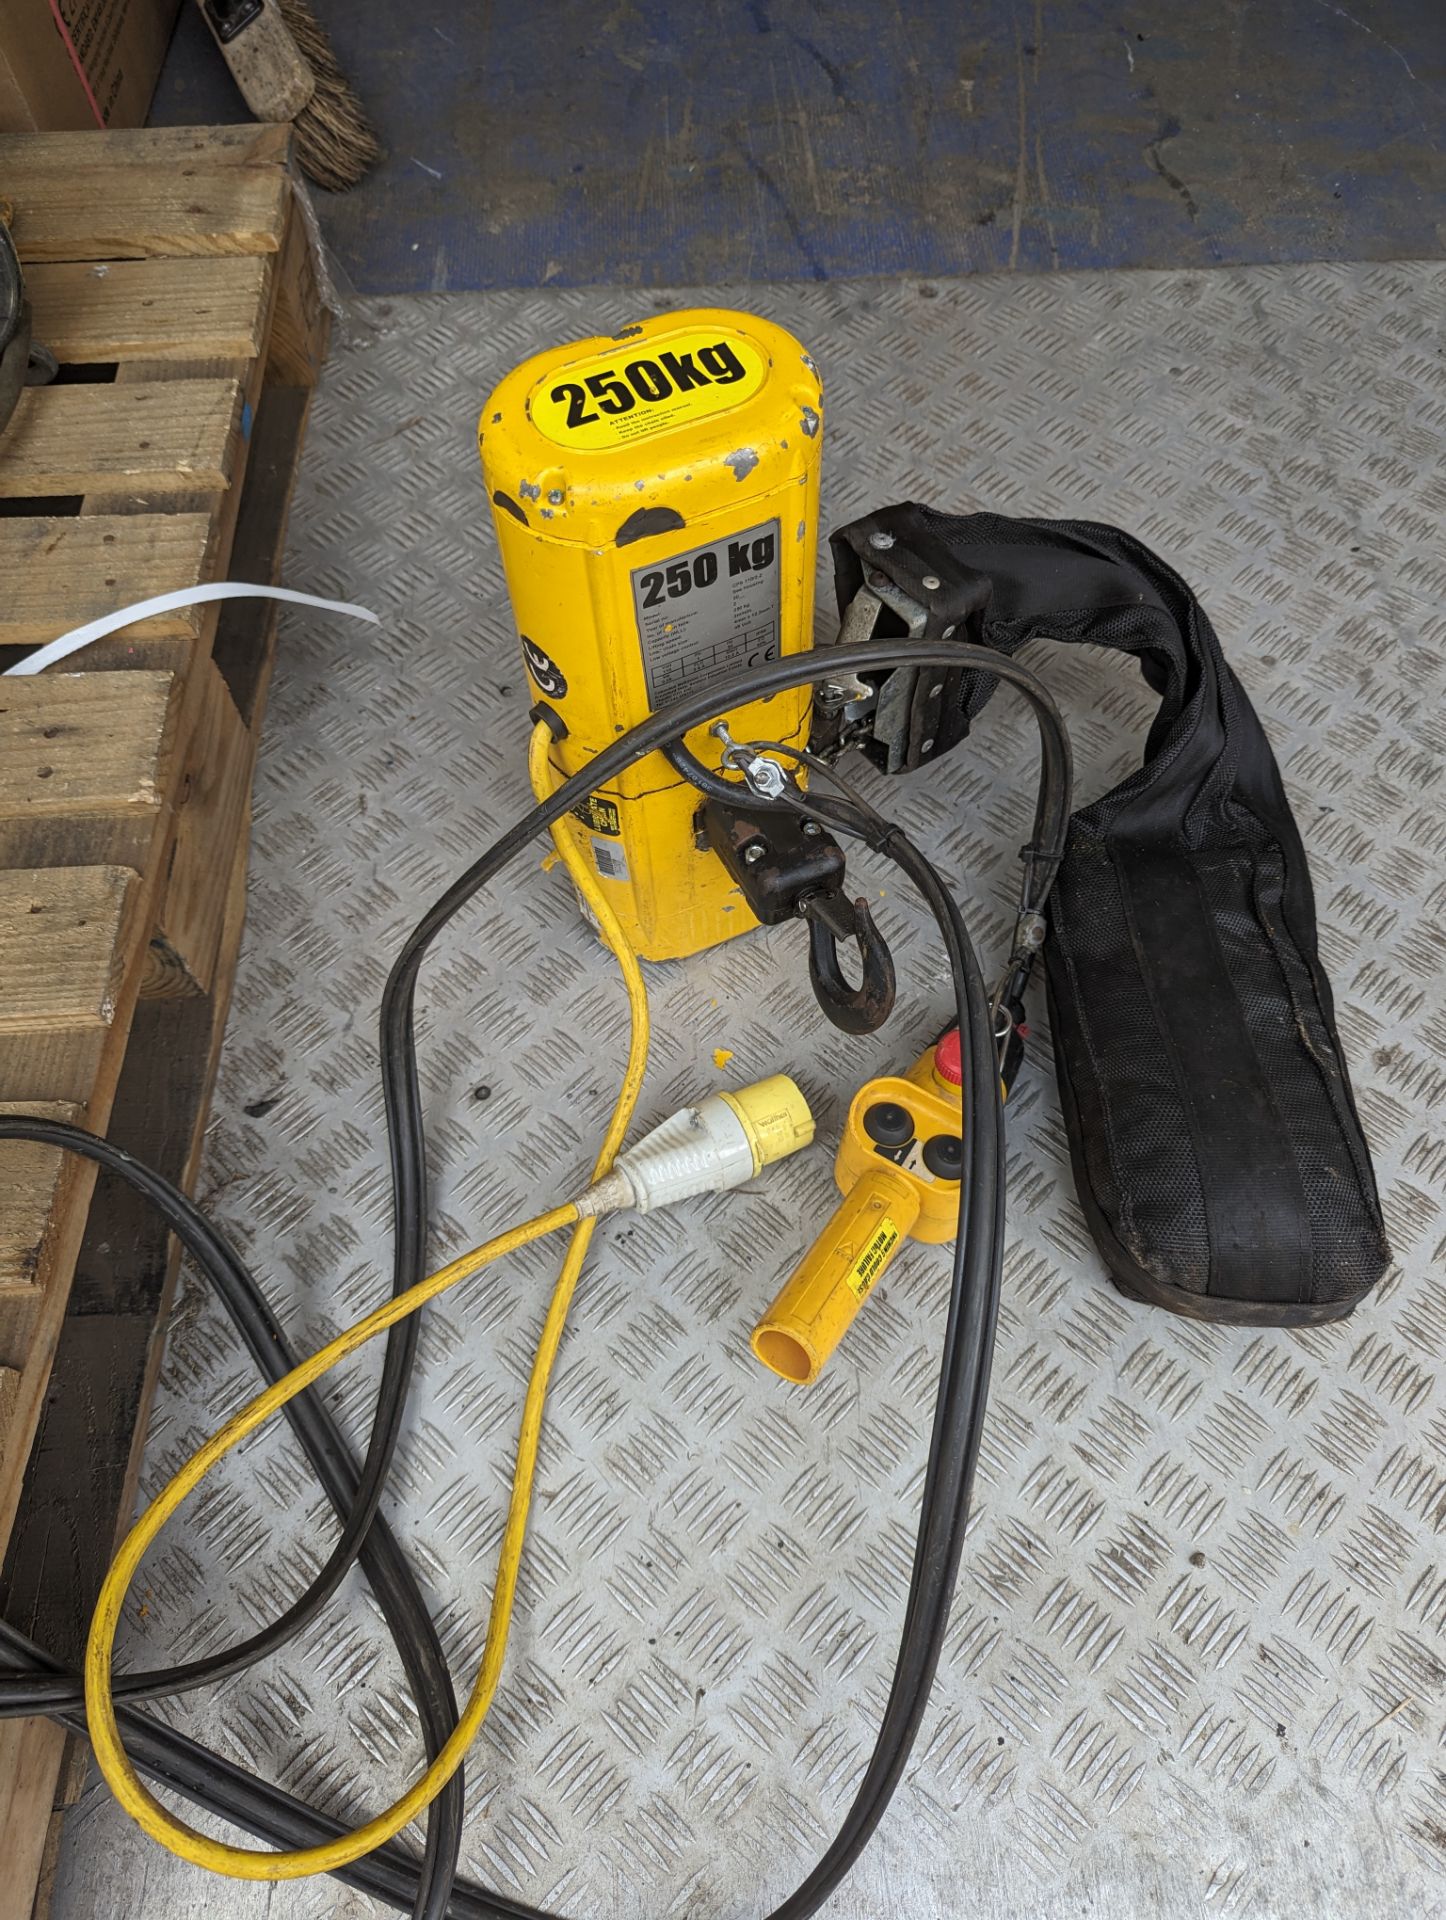 250KG ELECTRIC HOIST 110V, SLIGHTLY USED IN PERFECT WORKING CONDITION